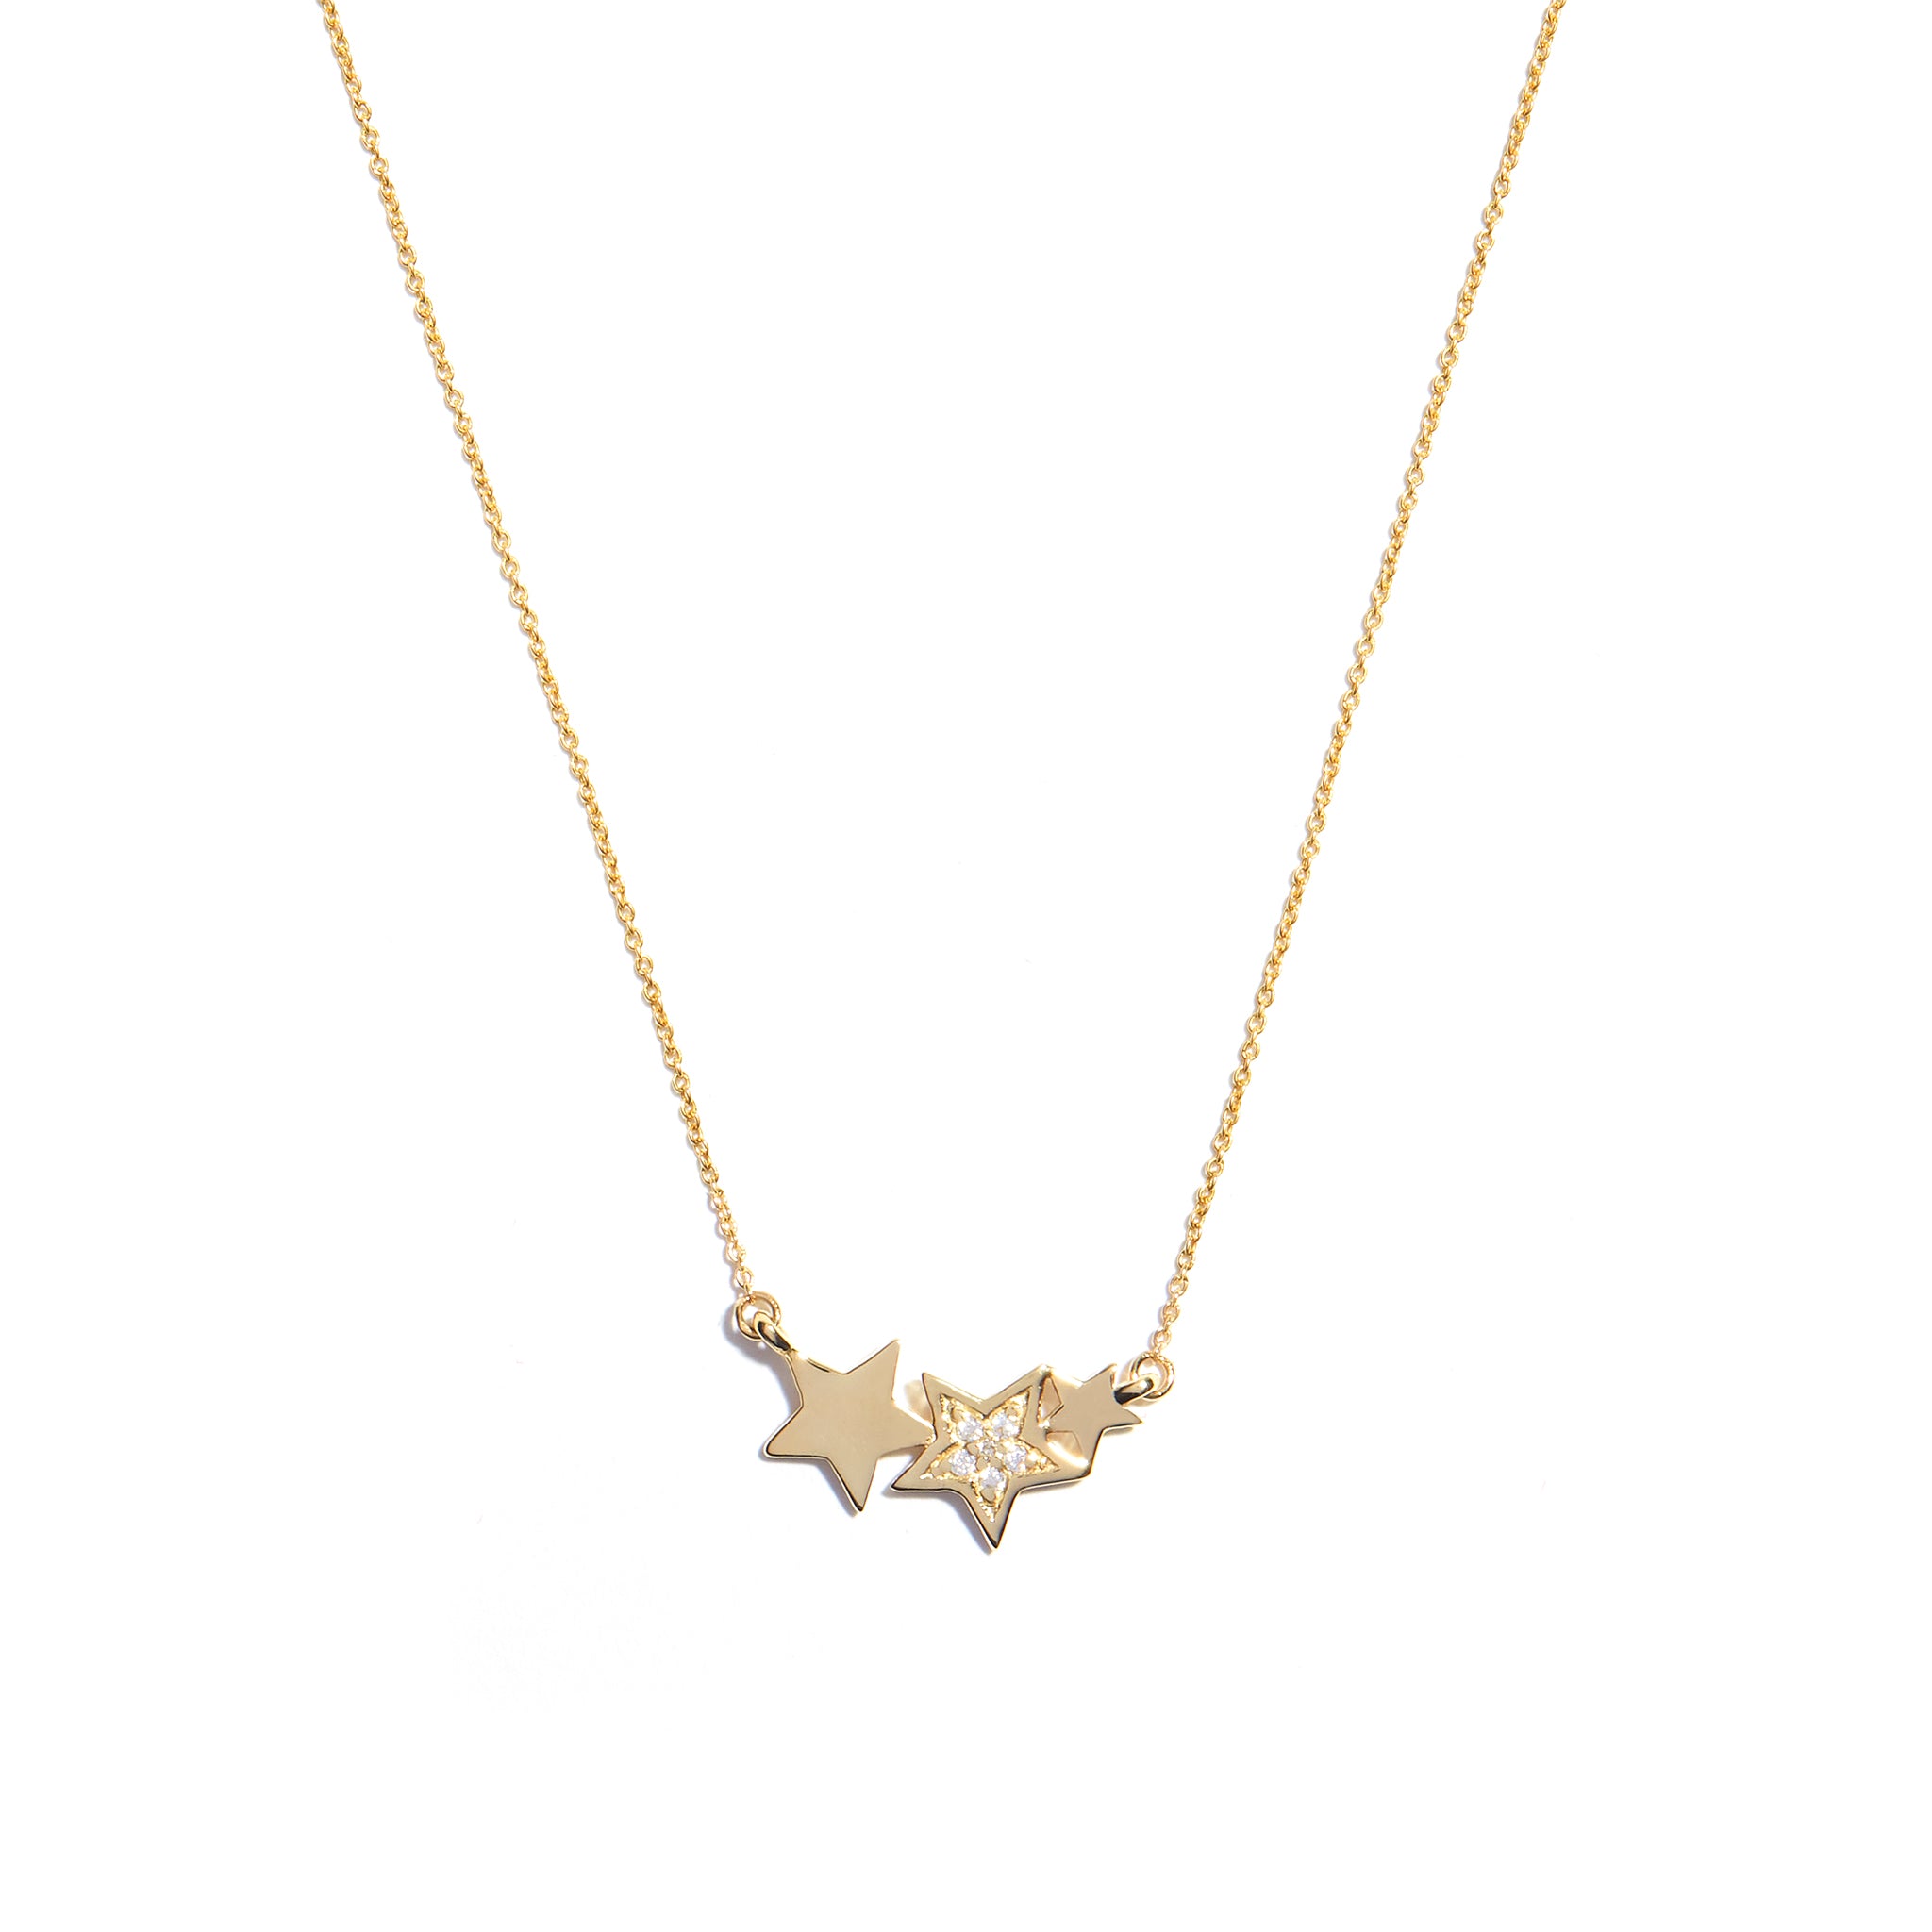 A gold chain with a trio of stars in different sizes. The middle star is embellished with cubic zirconias to ensure a bit of sparkle.